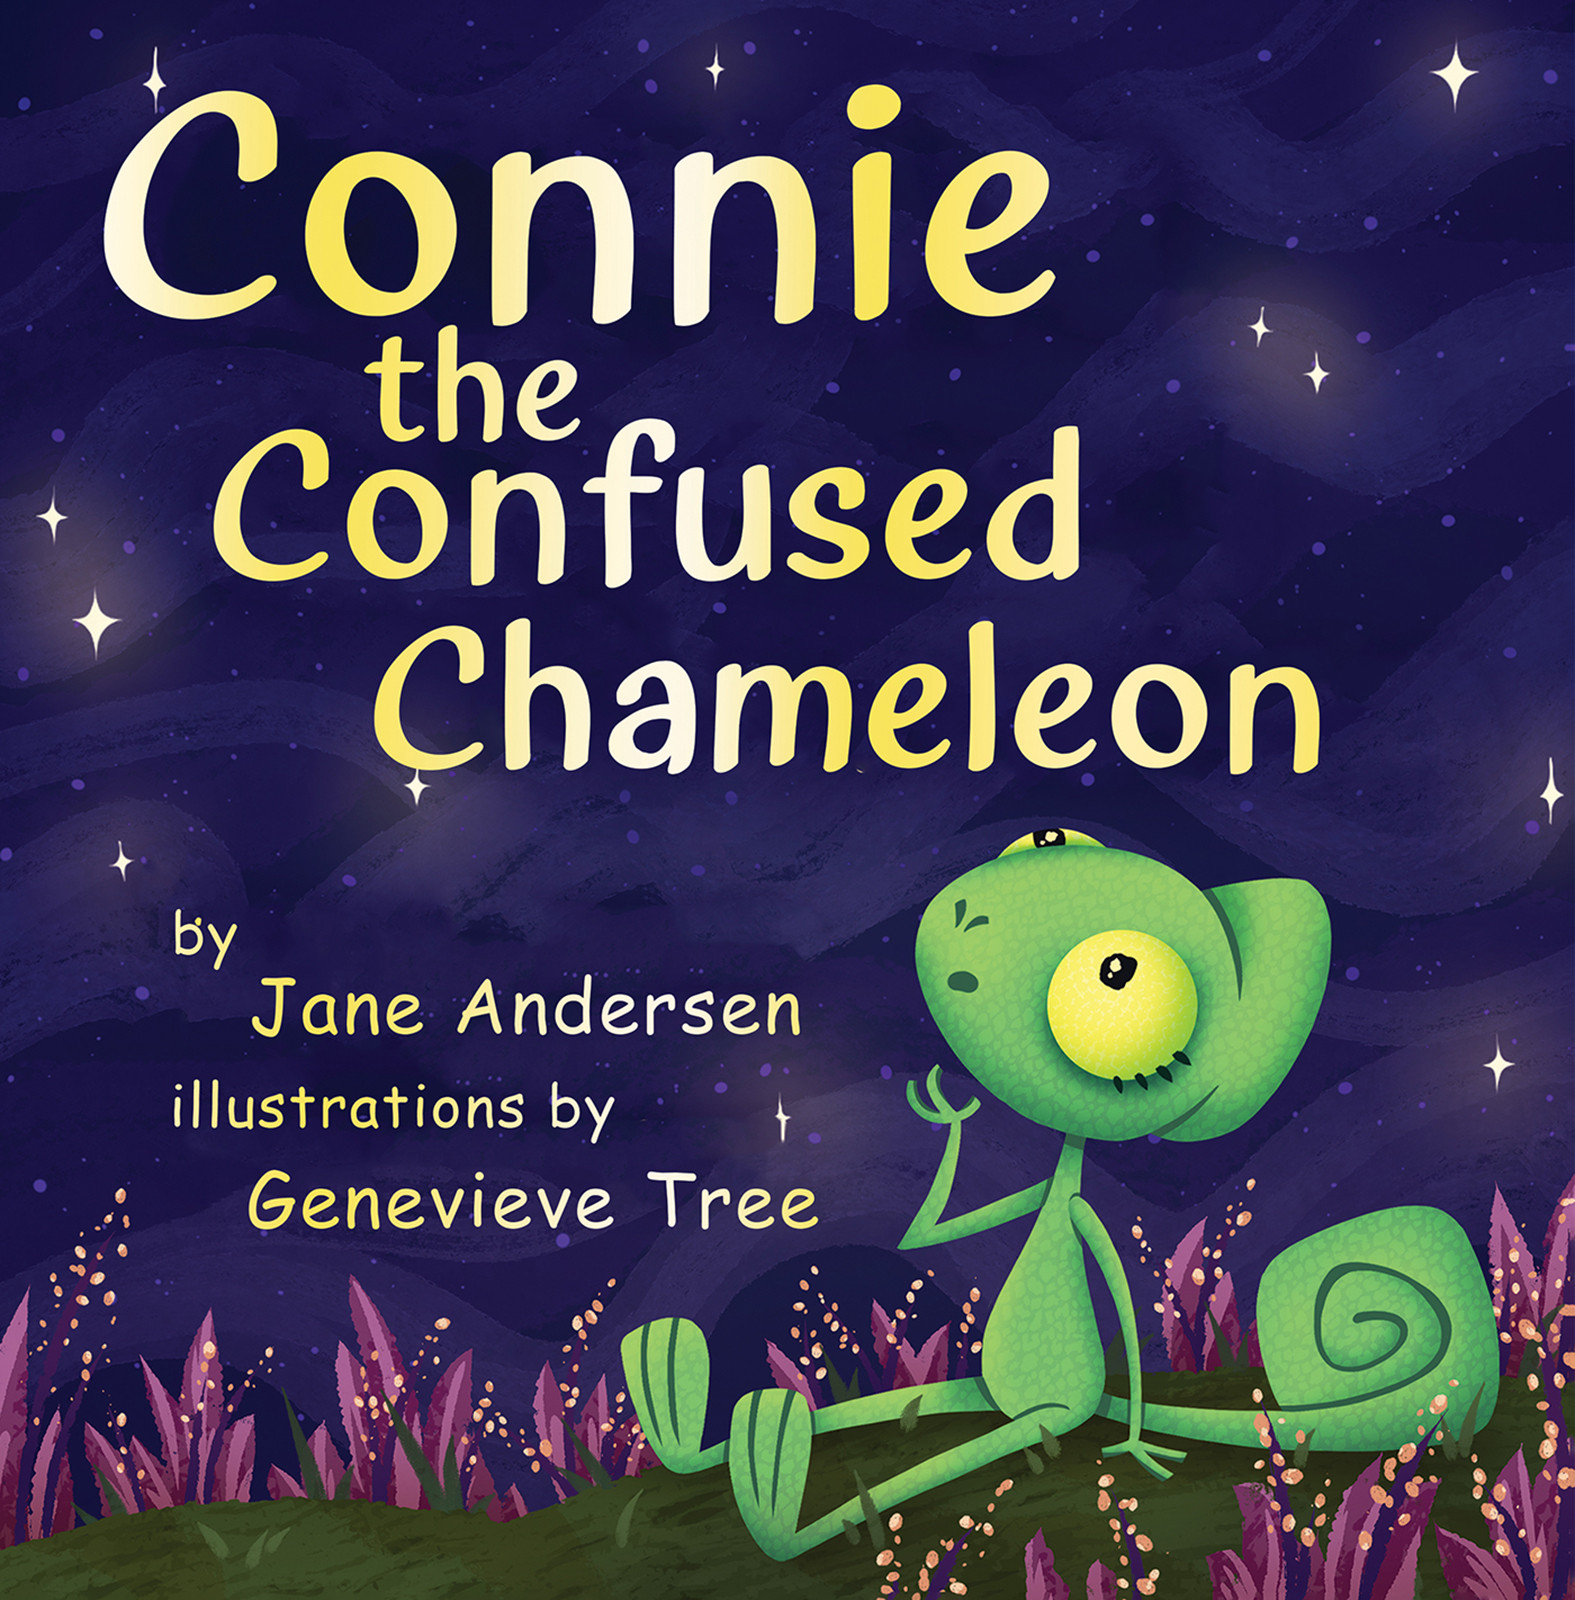 Connie the Confused Chameleon